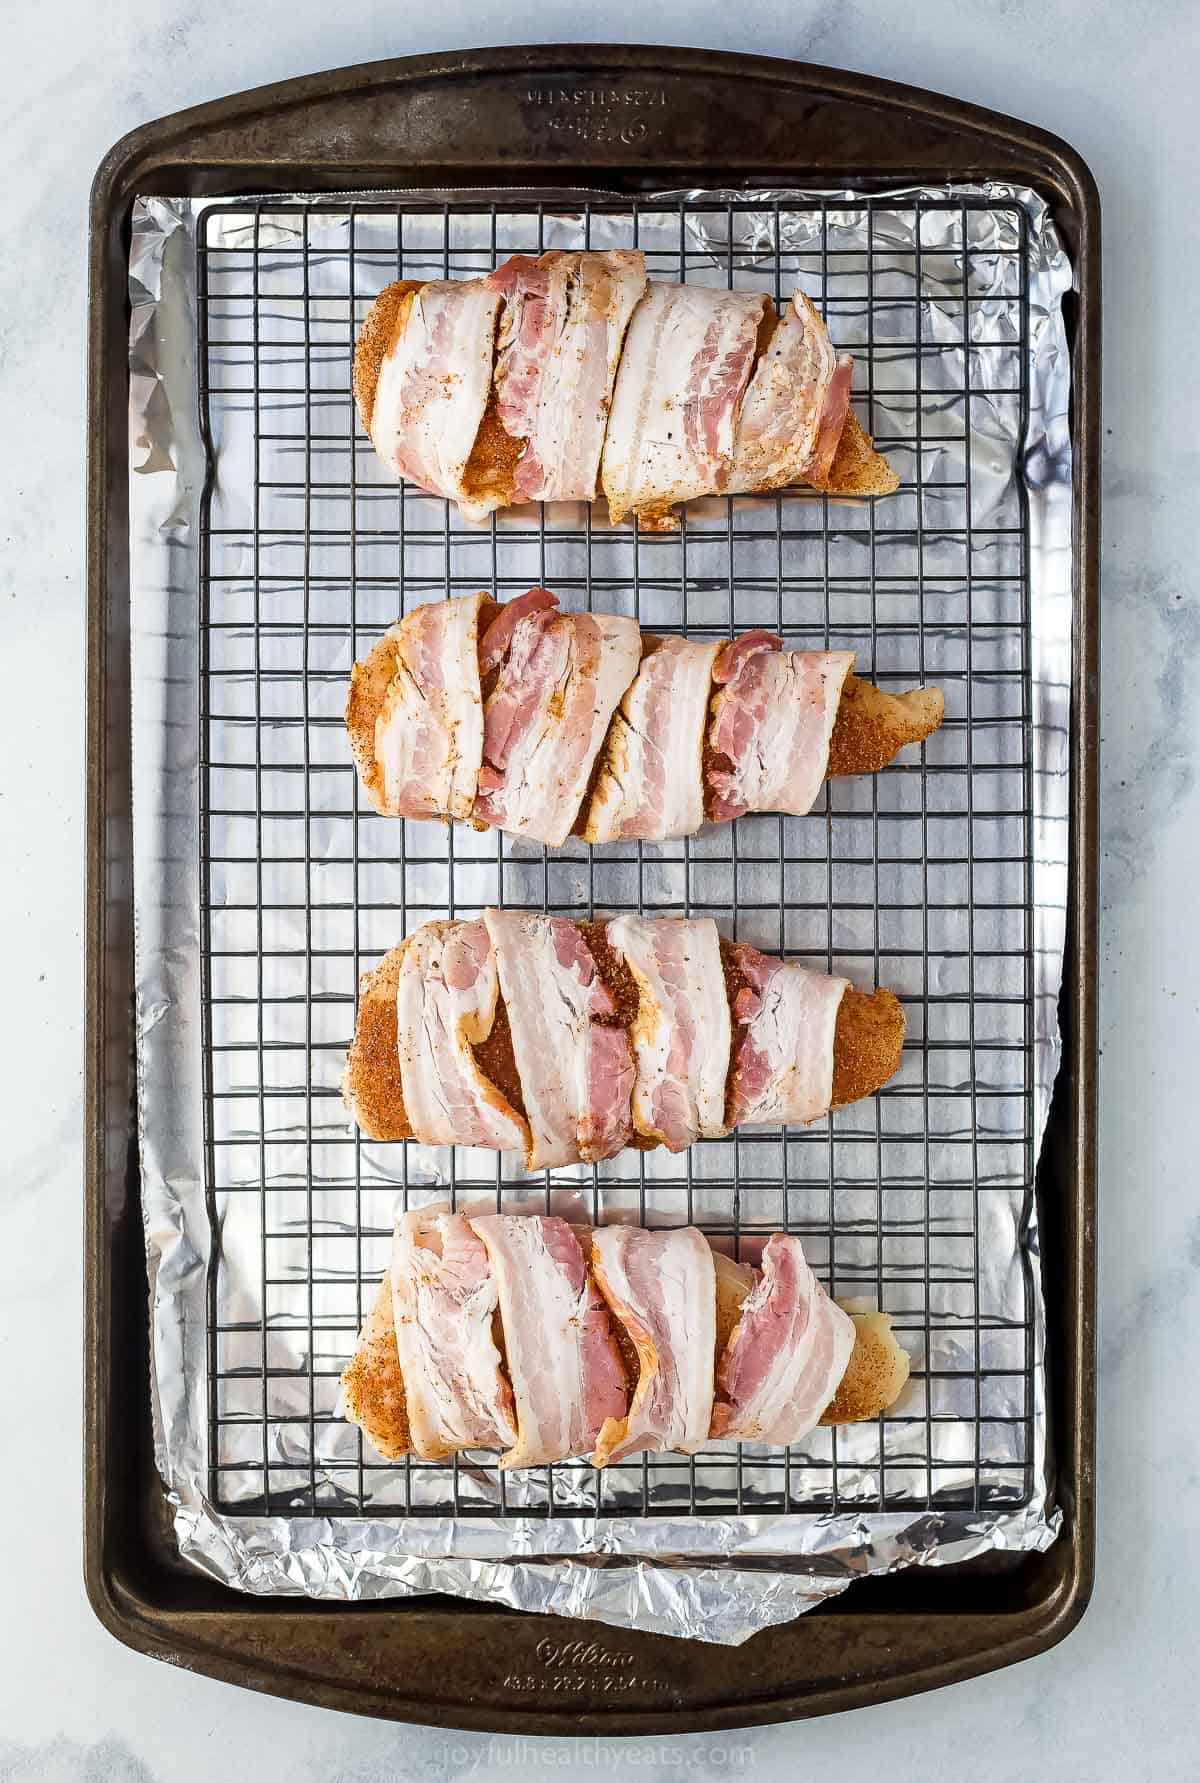 Chicken breasts wrapped in bacon on a baking sheet